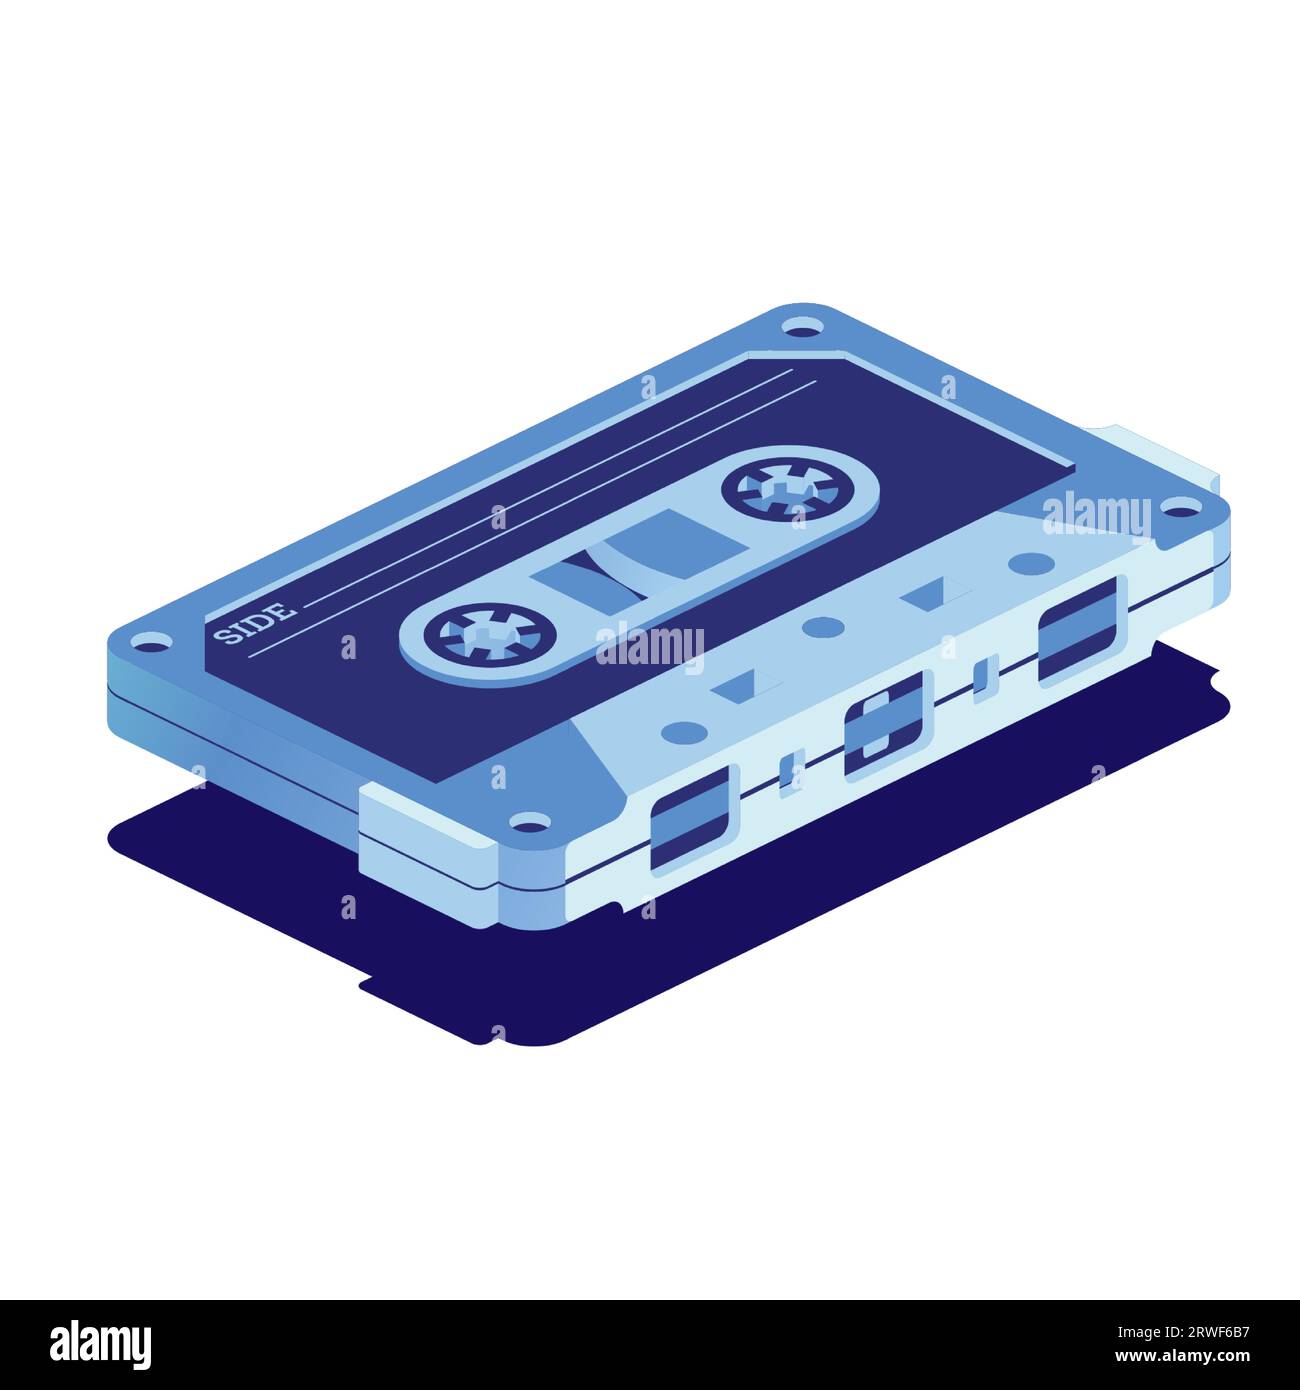 Retro Audio Cassette Tape isolated on white. Isometric Music Concept. Retro Device from 80s and 90s. Vector Illustration. Stock Vector